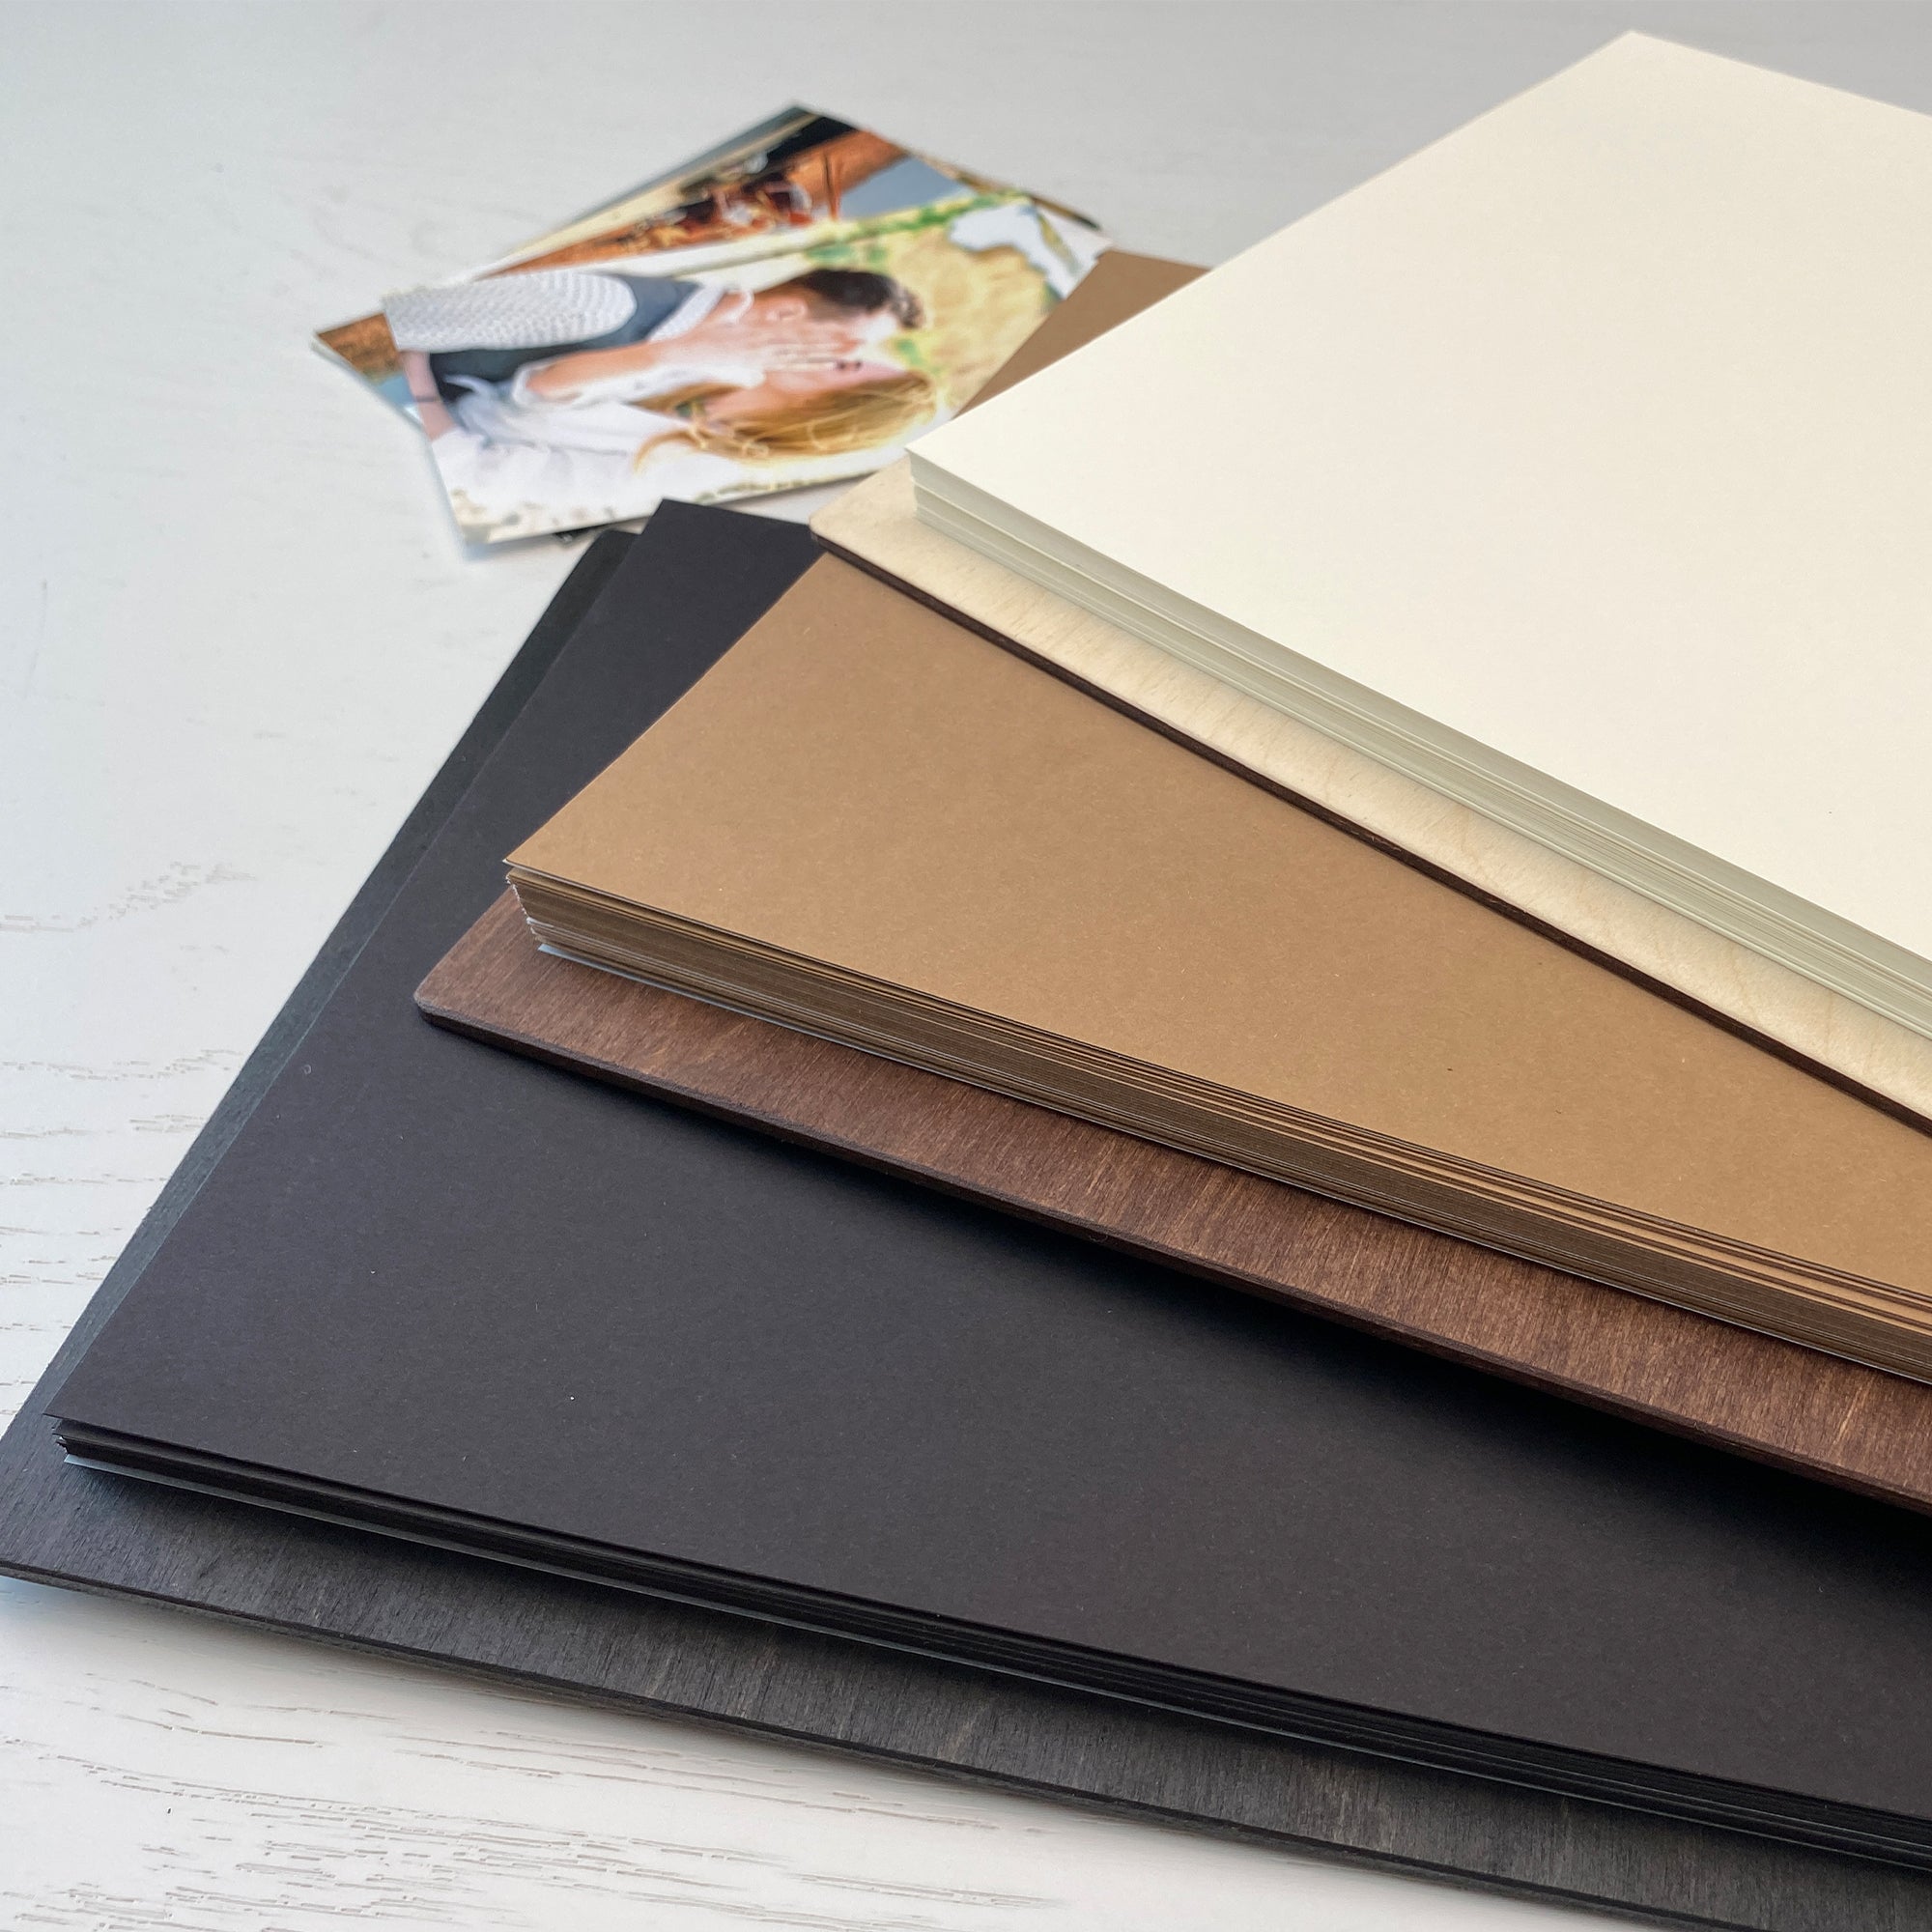 Personalized photo album with leather cover and Flowers engraving